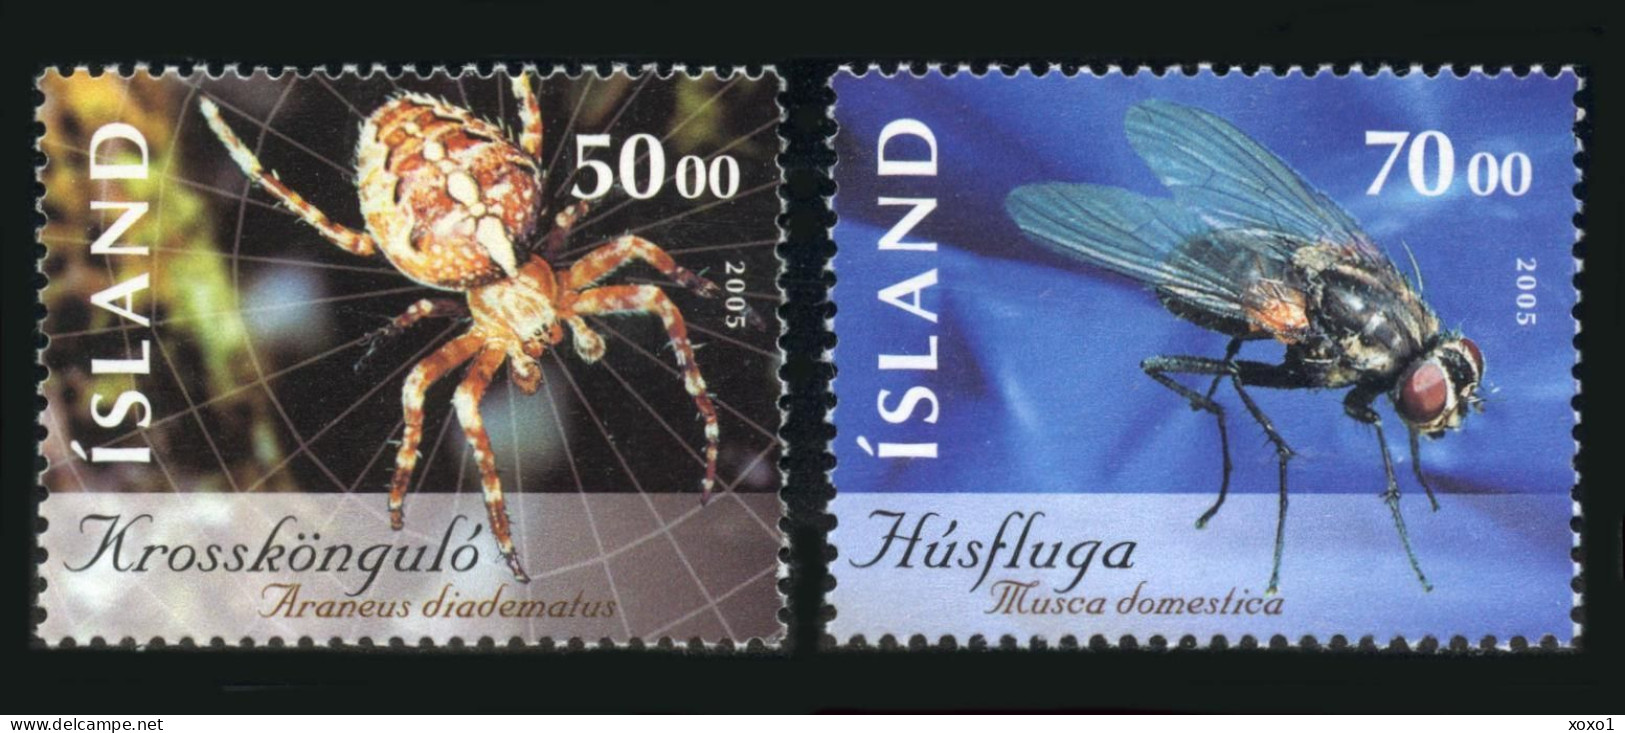 Iceland 2005  MiNr. 1075 - 1076 Island Insects And Spiders  # 2     2v  MNH** 3.50 € - Beetles